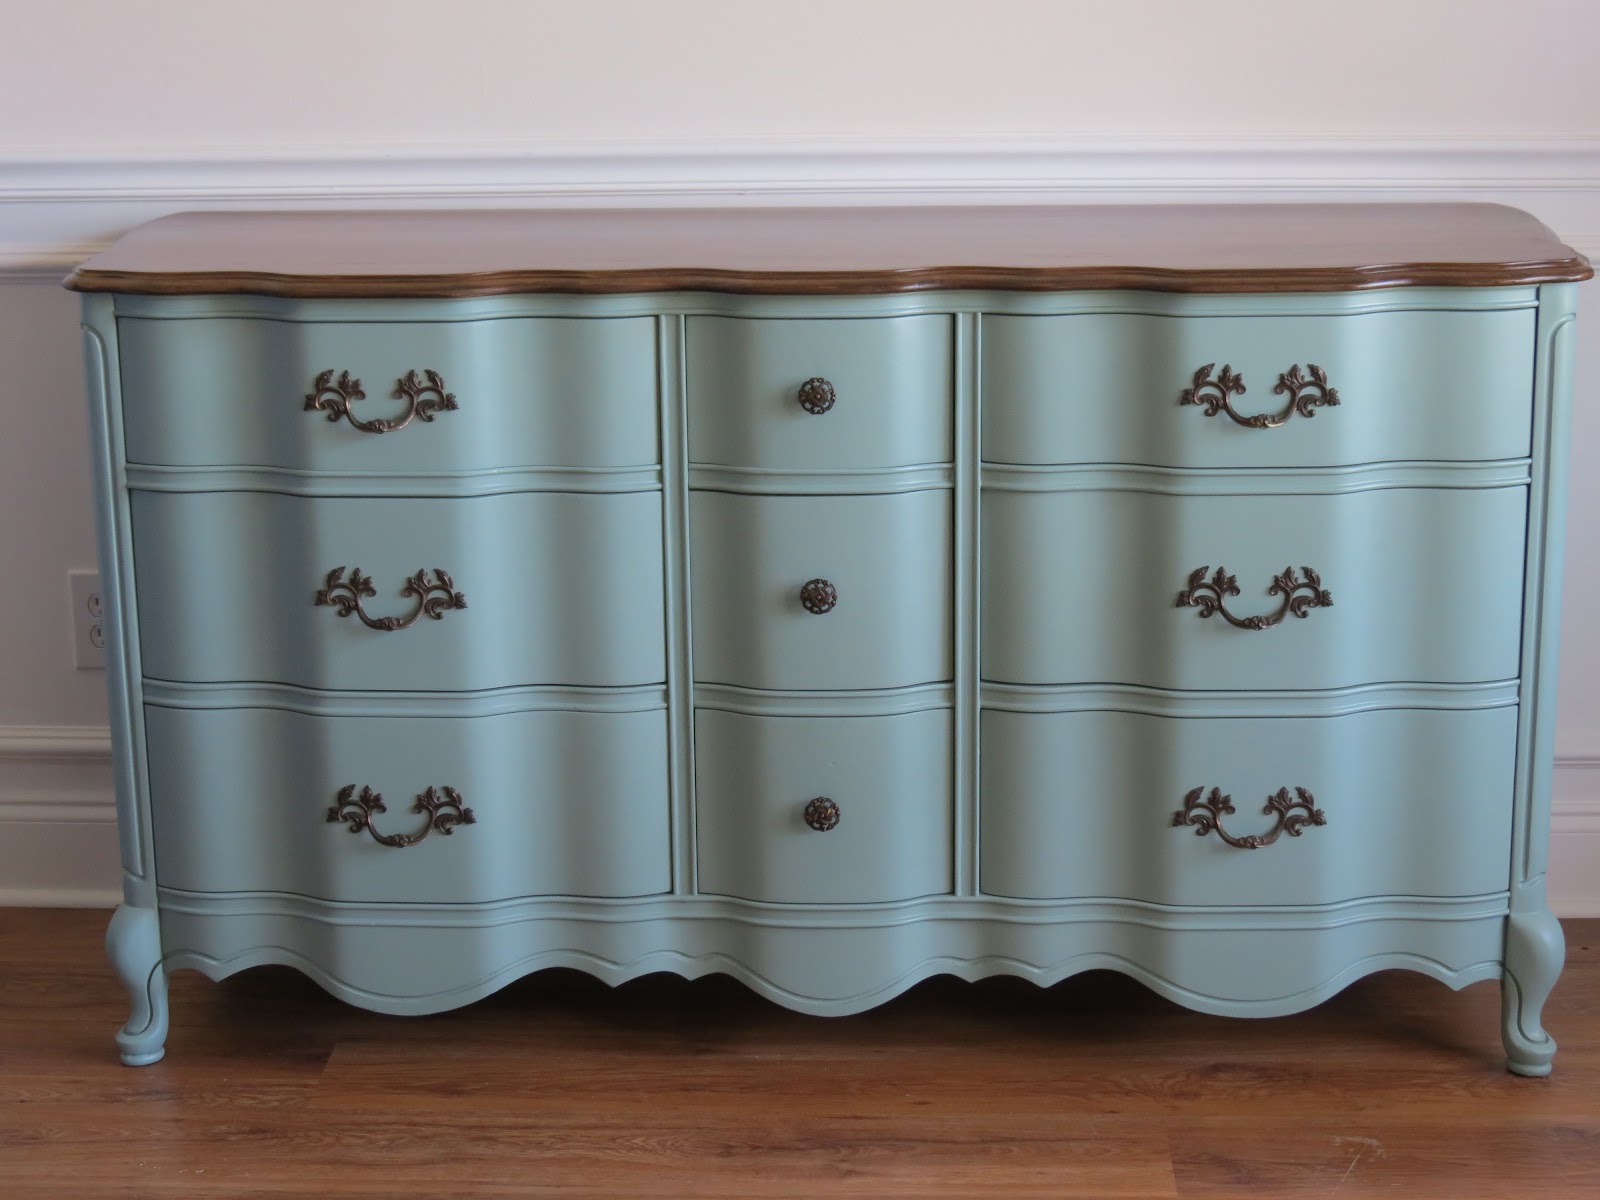 Painted French Provincial Furniture Modern Diy Art Design Collection